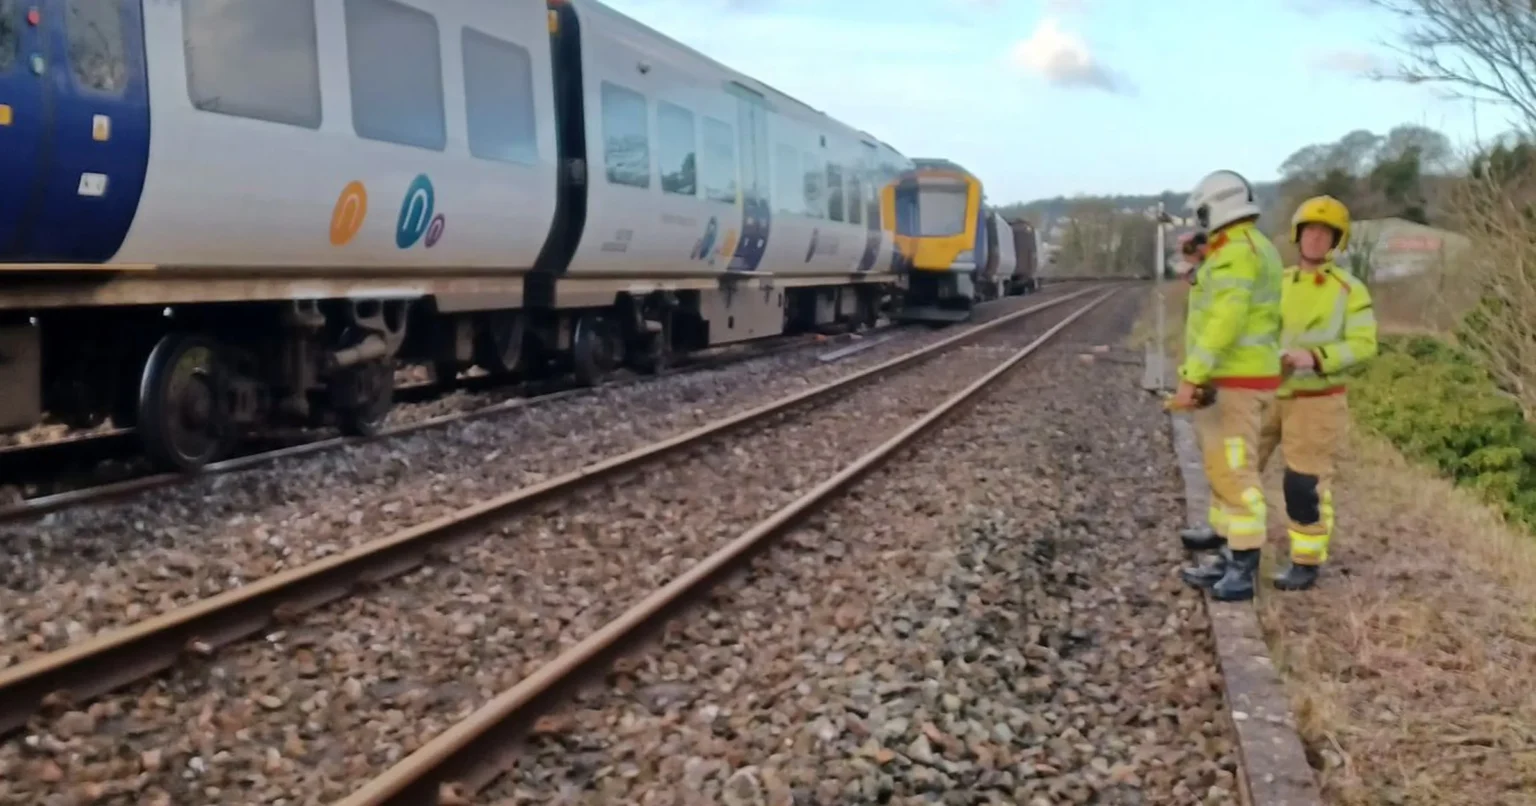 Train derails and forces huge stretch of railway to shut down